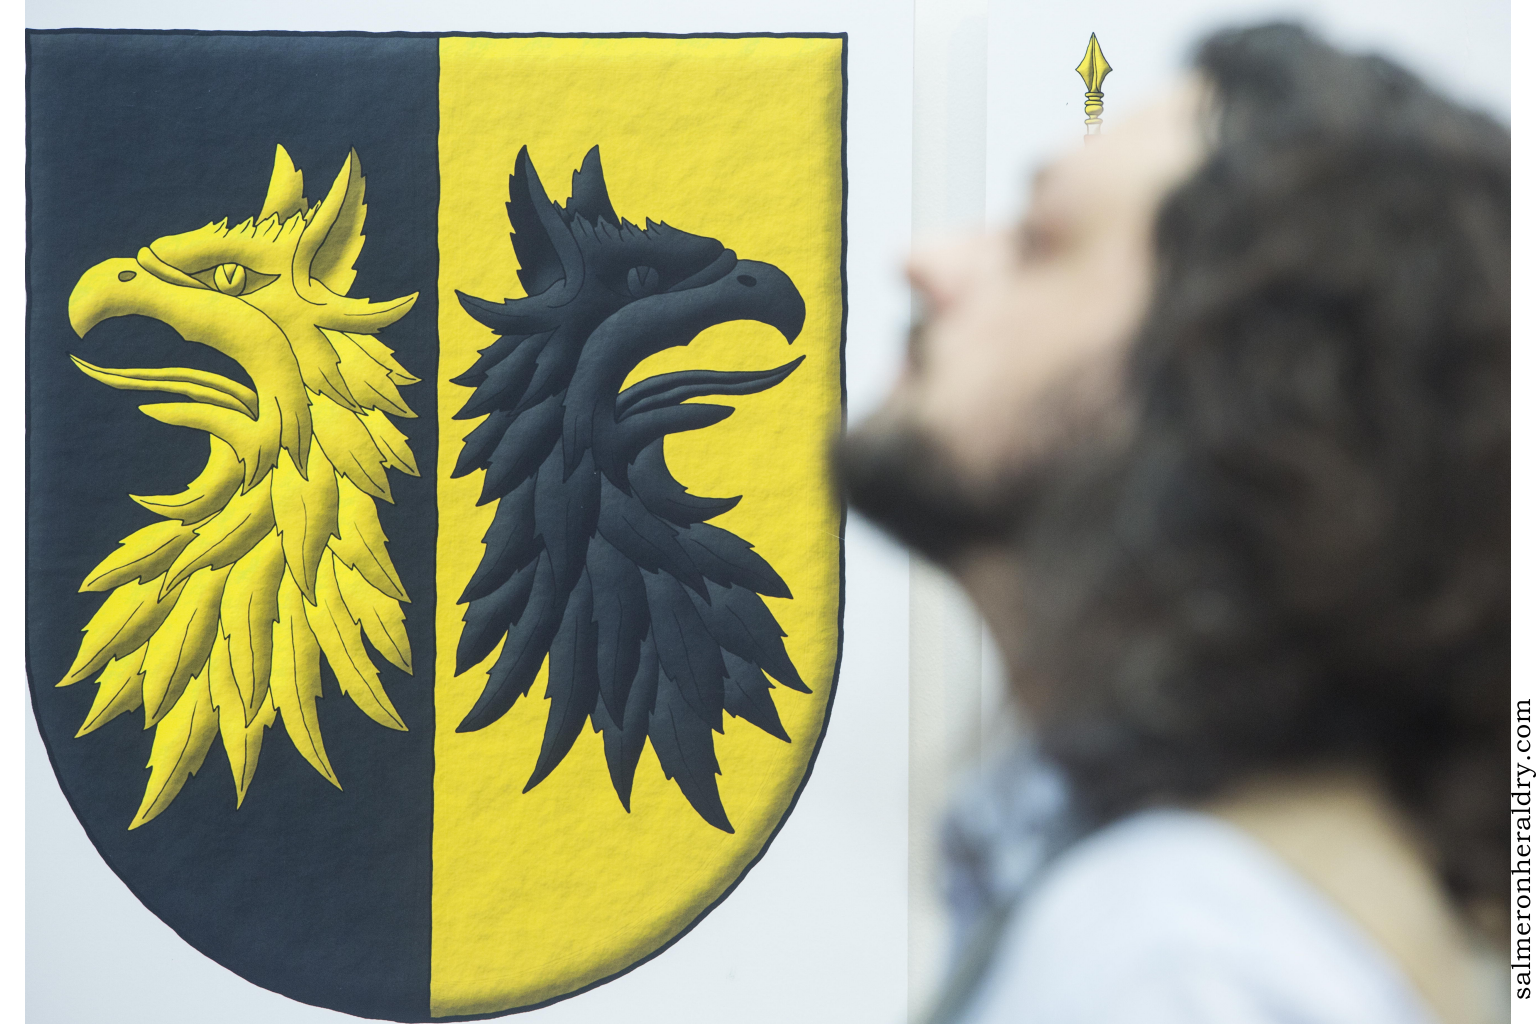 Party per pale Sable and Or, two griffins' heads eraticted, and addorsed counterchanged.